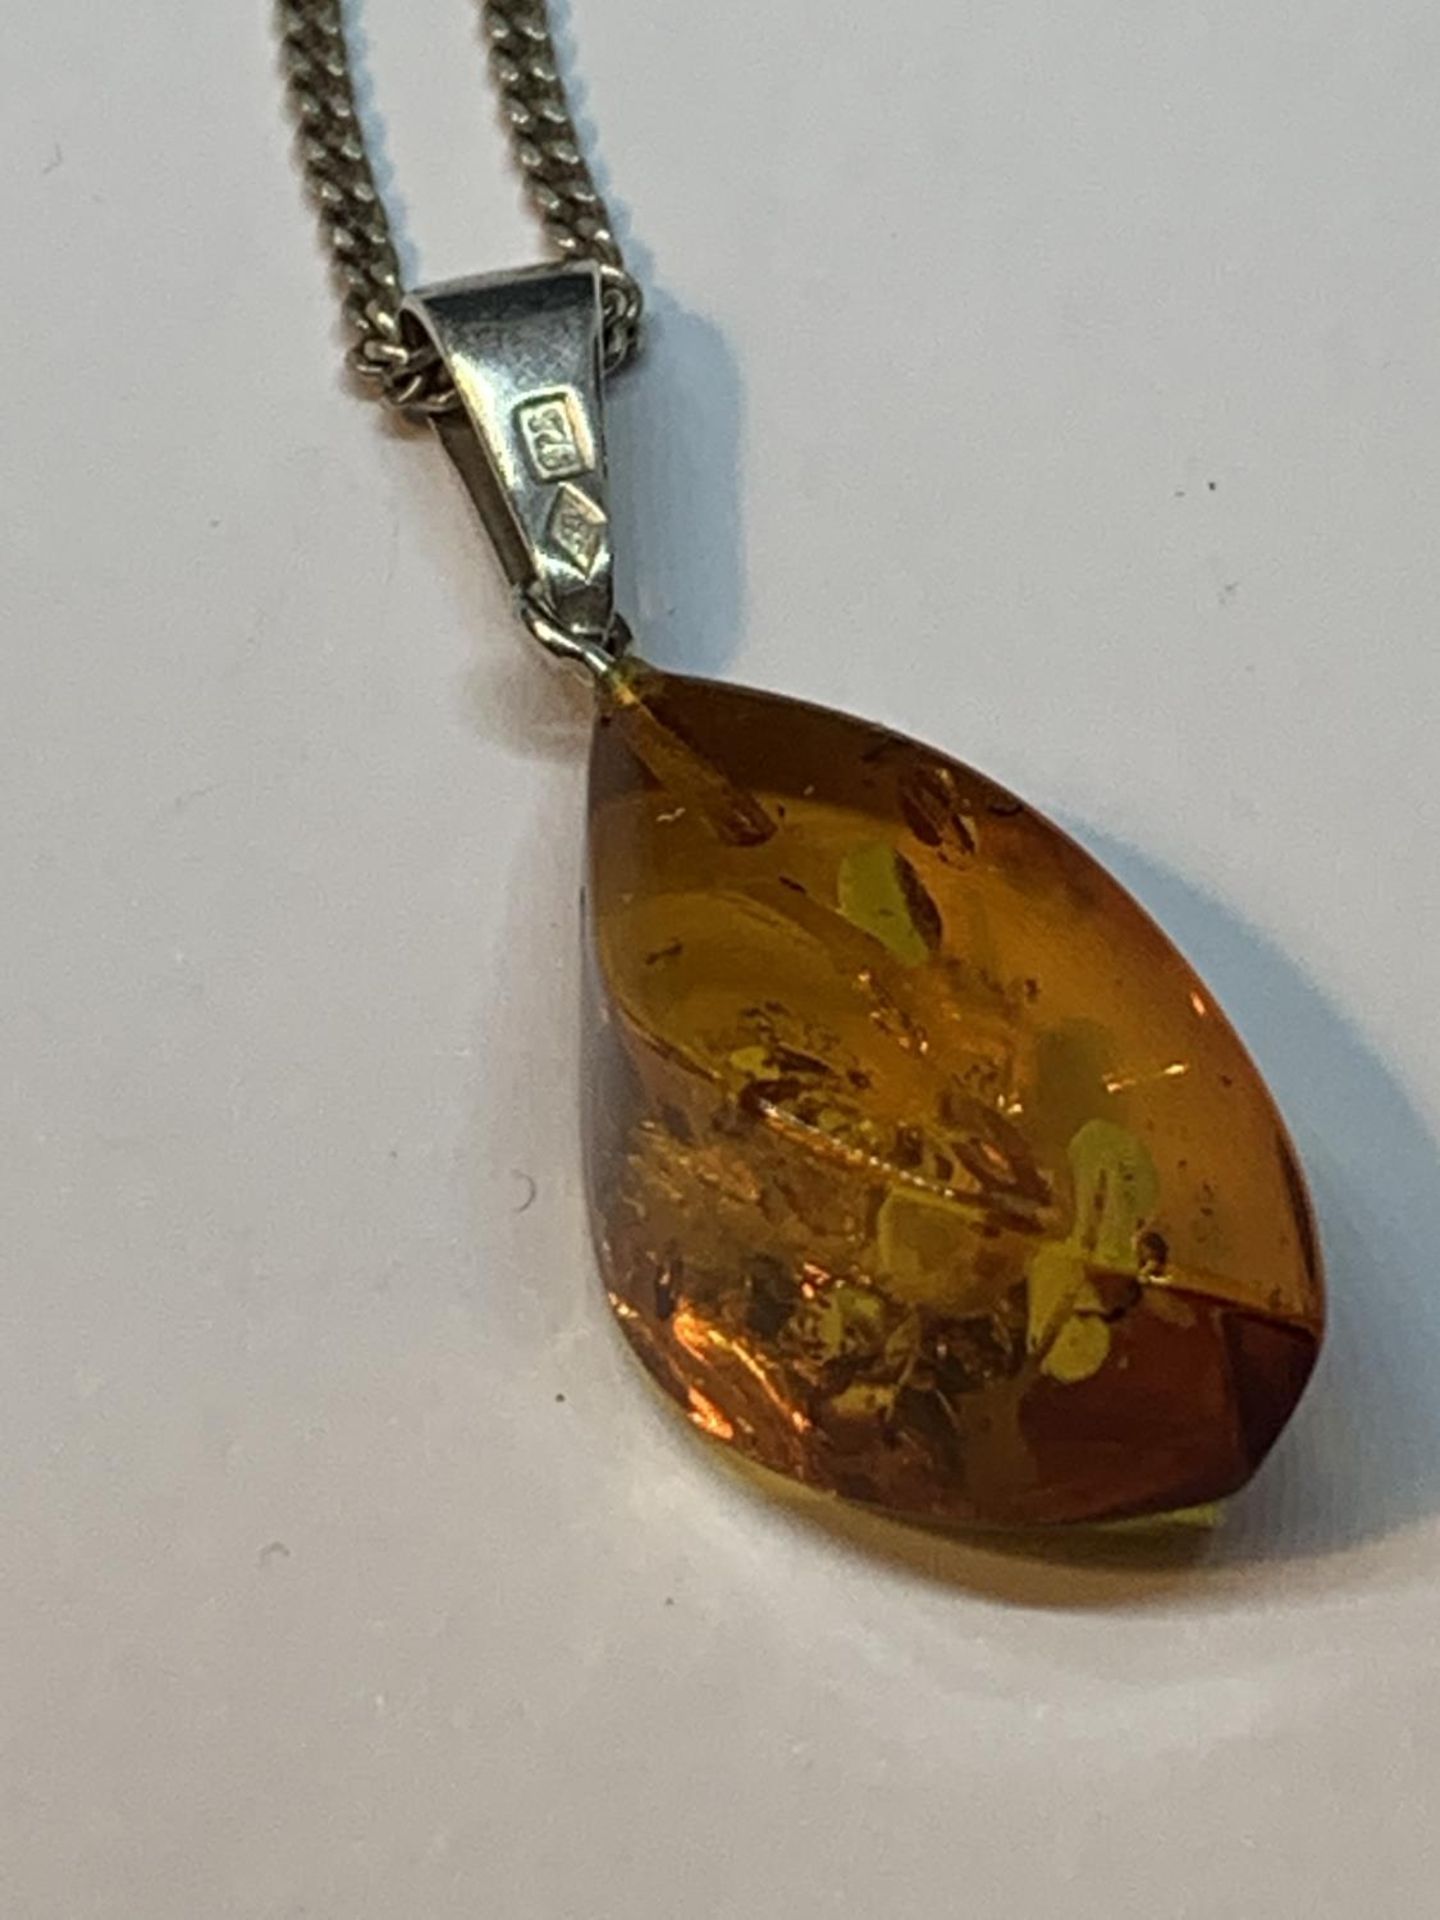 A DECORATIVE SILVER BANGLE WITH A LARGE CENTRAL AMBER STONE AND AN AMBER DROP ON A SILVER CHAIN IN A - Image 4 of 4